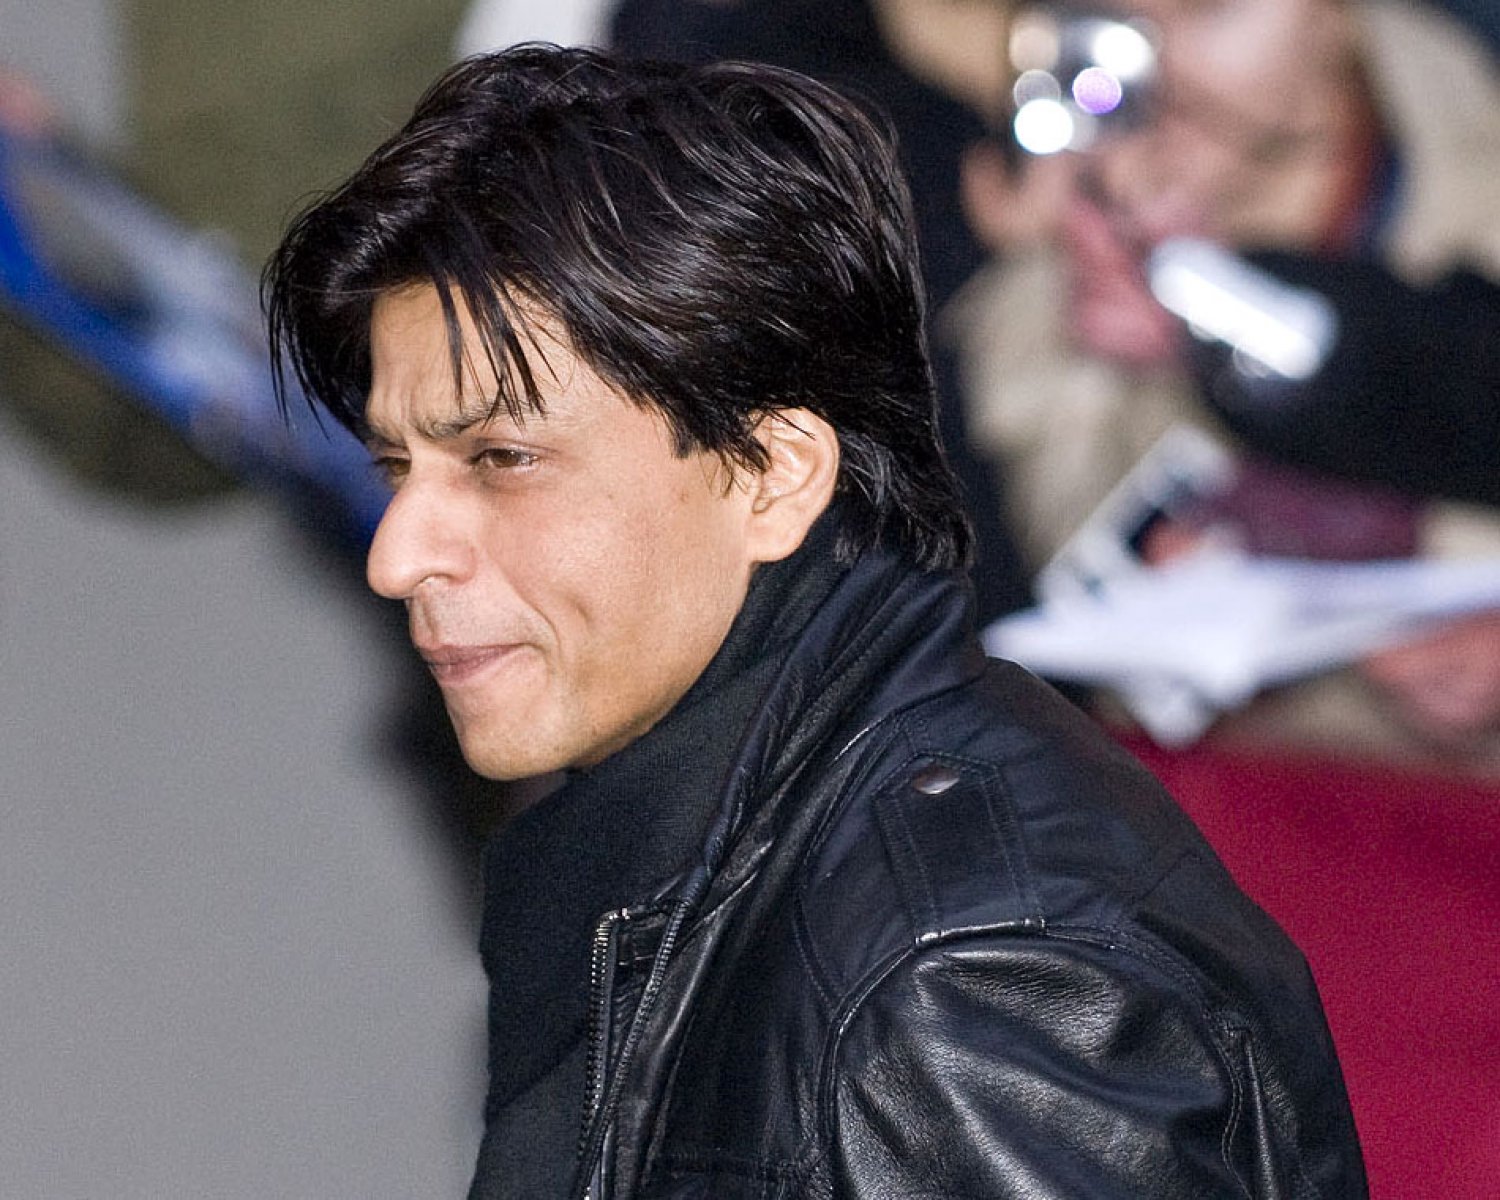 shahrukh-khan-emotional-story-of-his-father-deathhanberlinfilmfestival2008.jpg